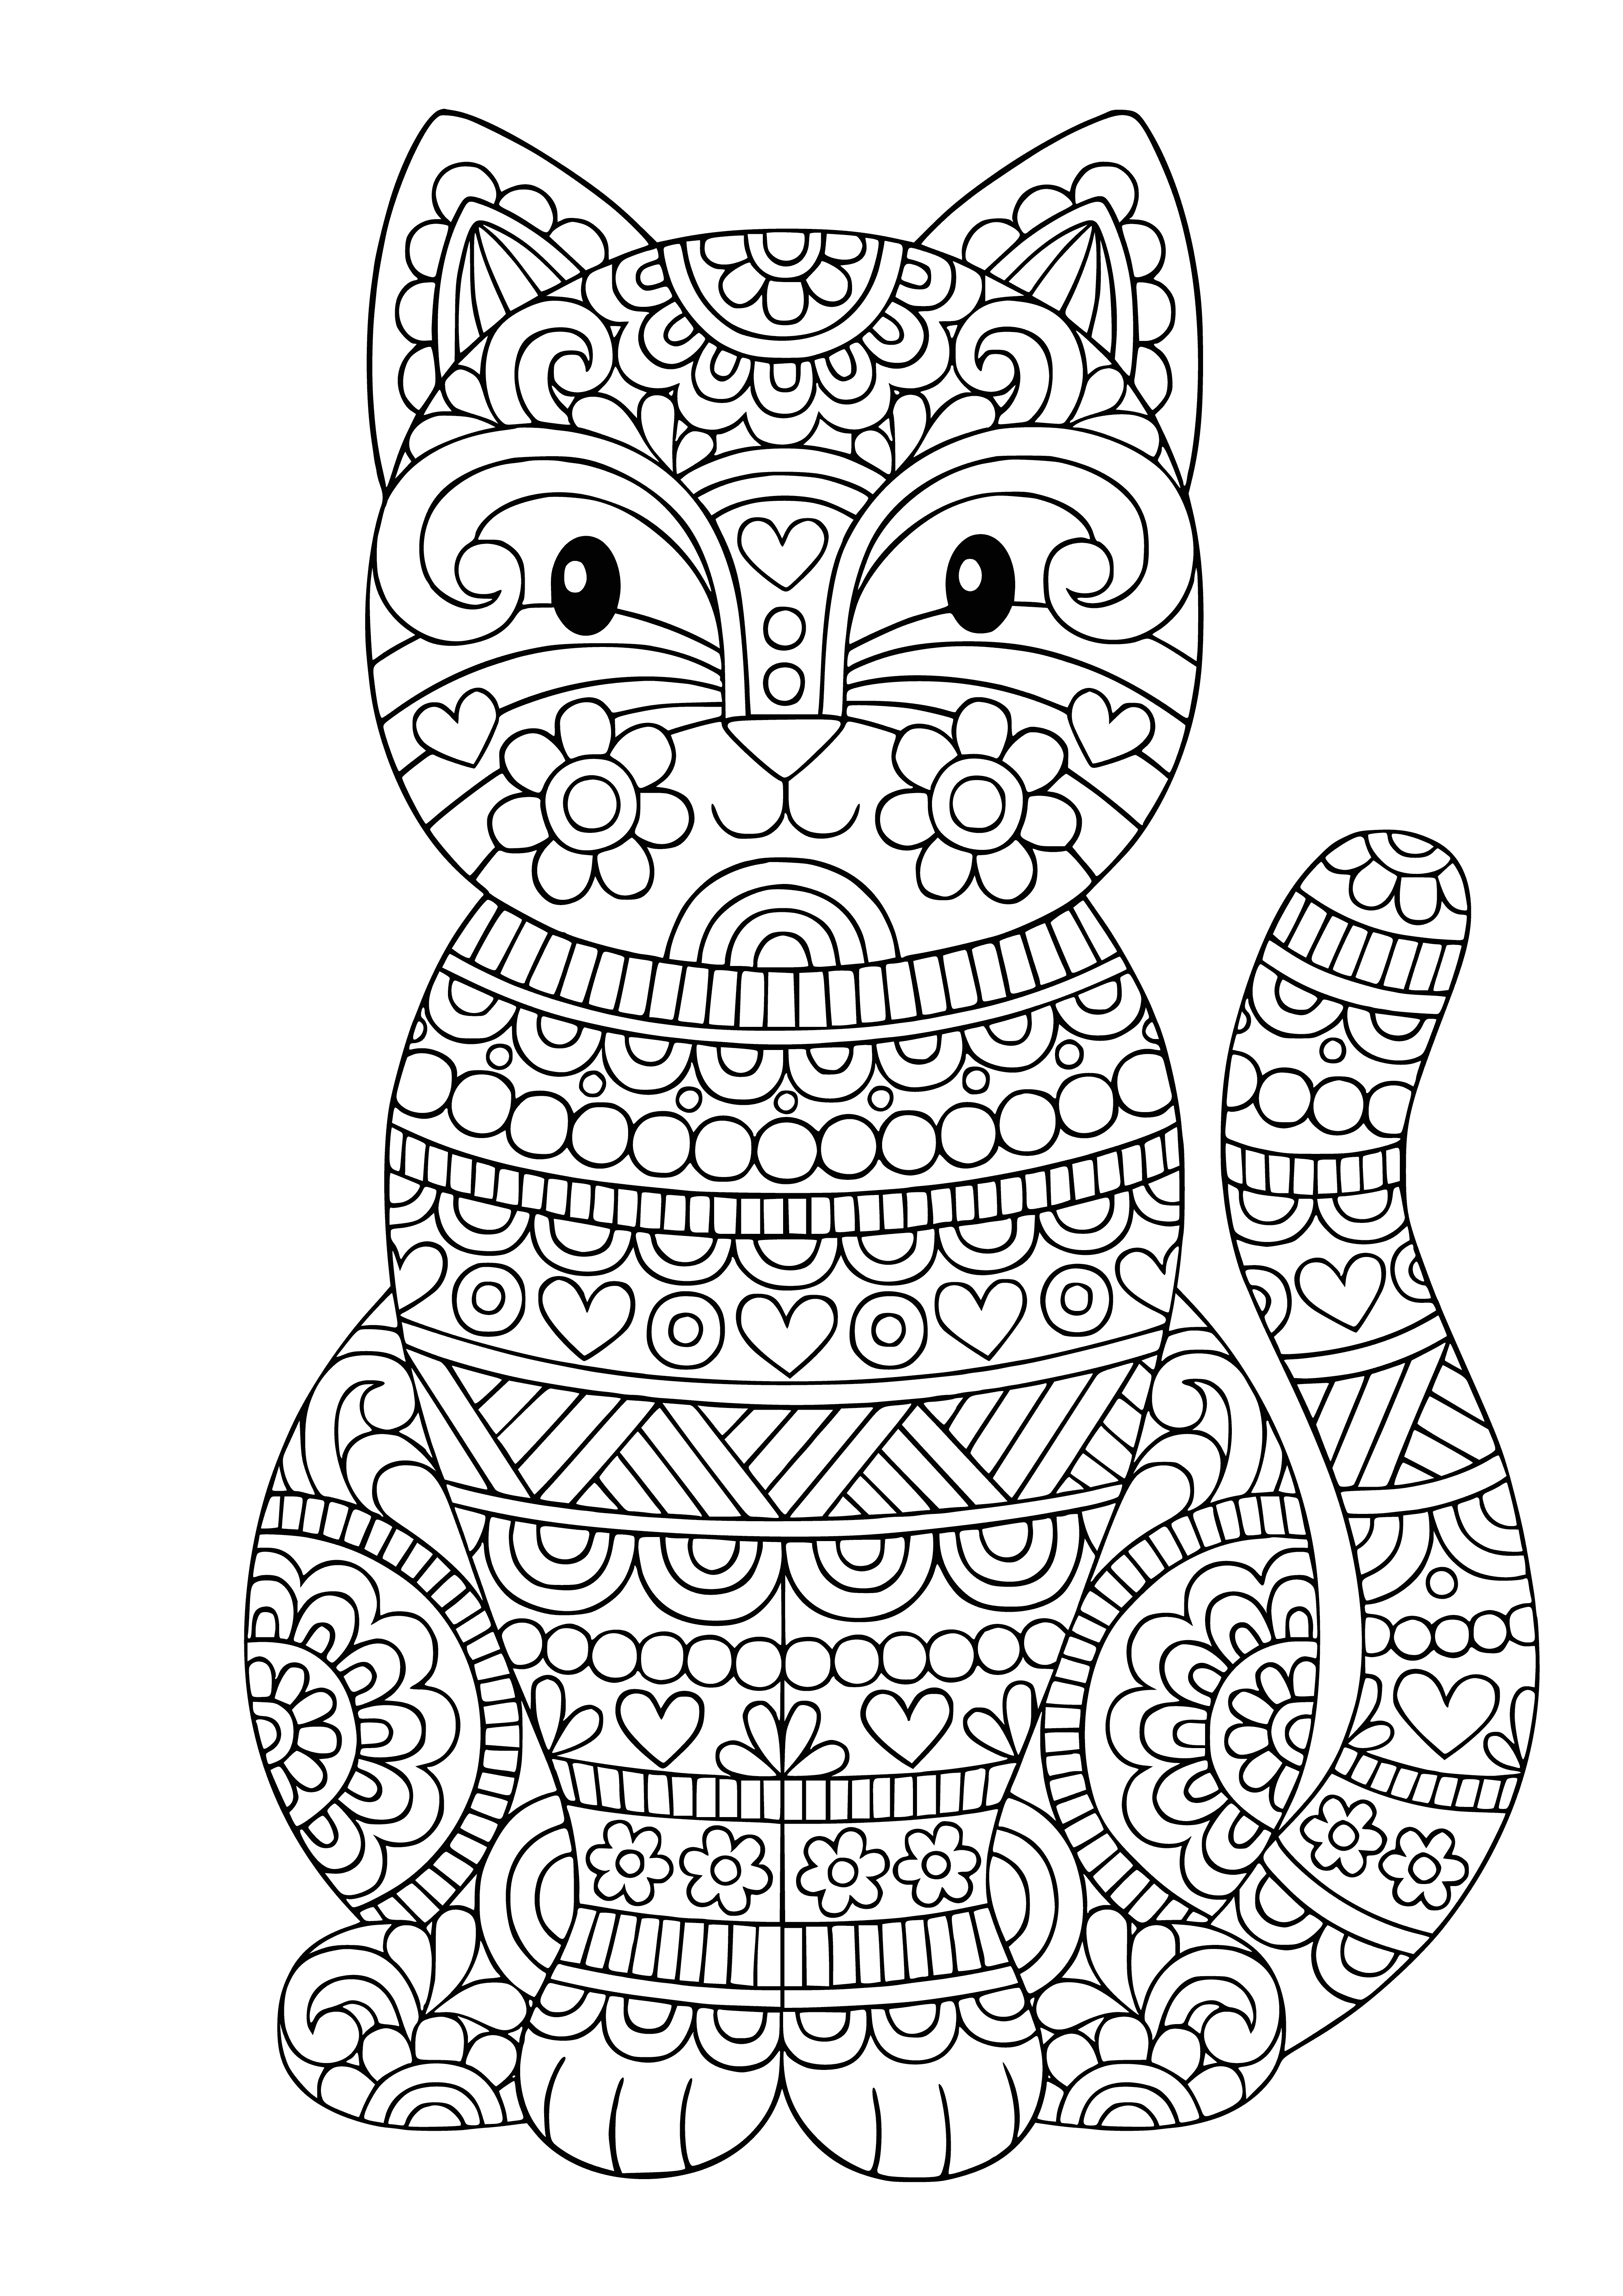 coloring page: Cat with big green eyes, black & white fur, paw raised, sitting down.